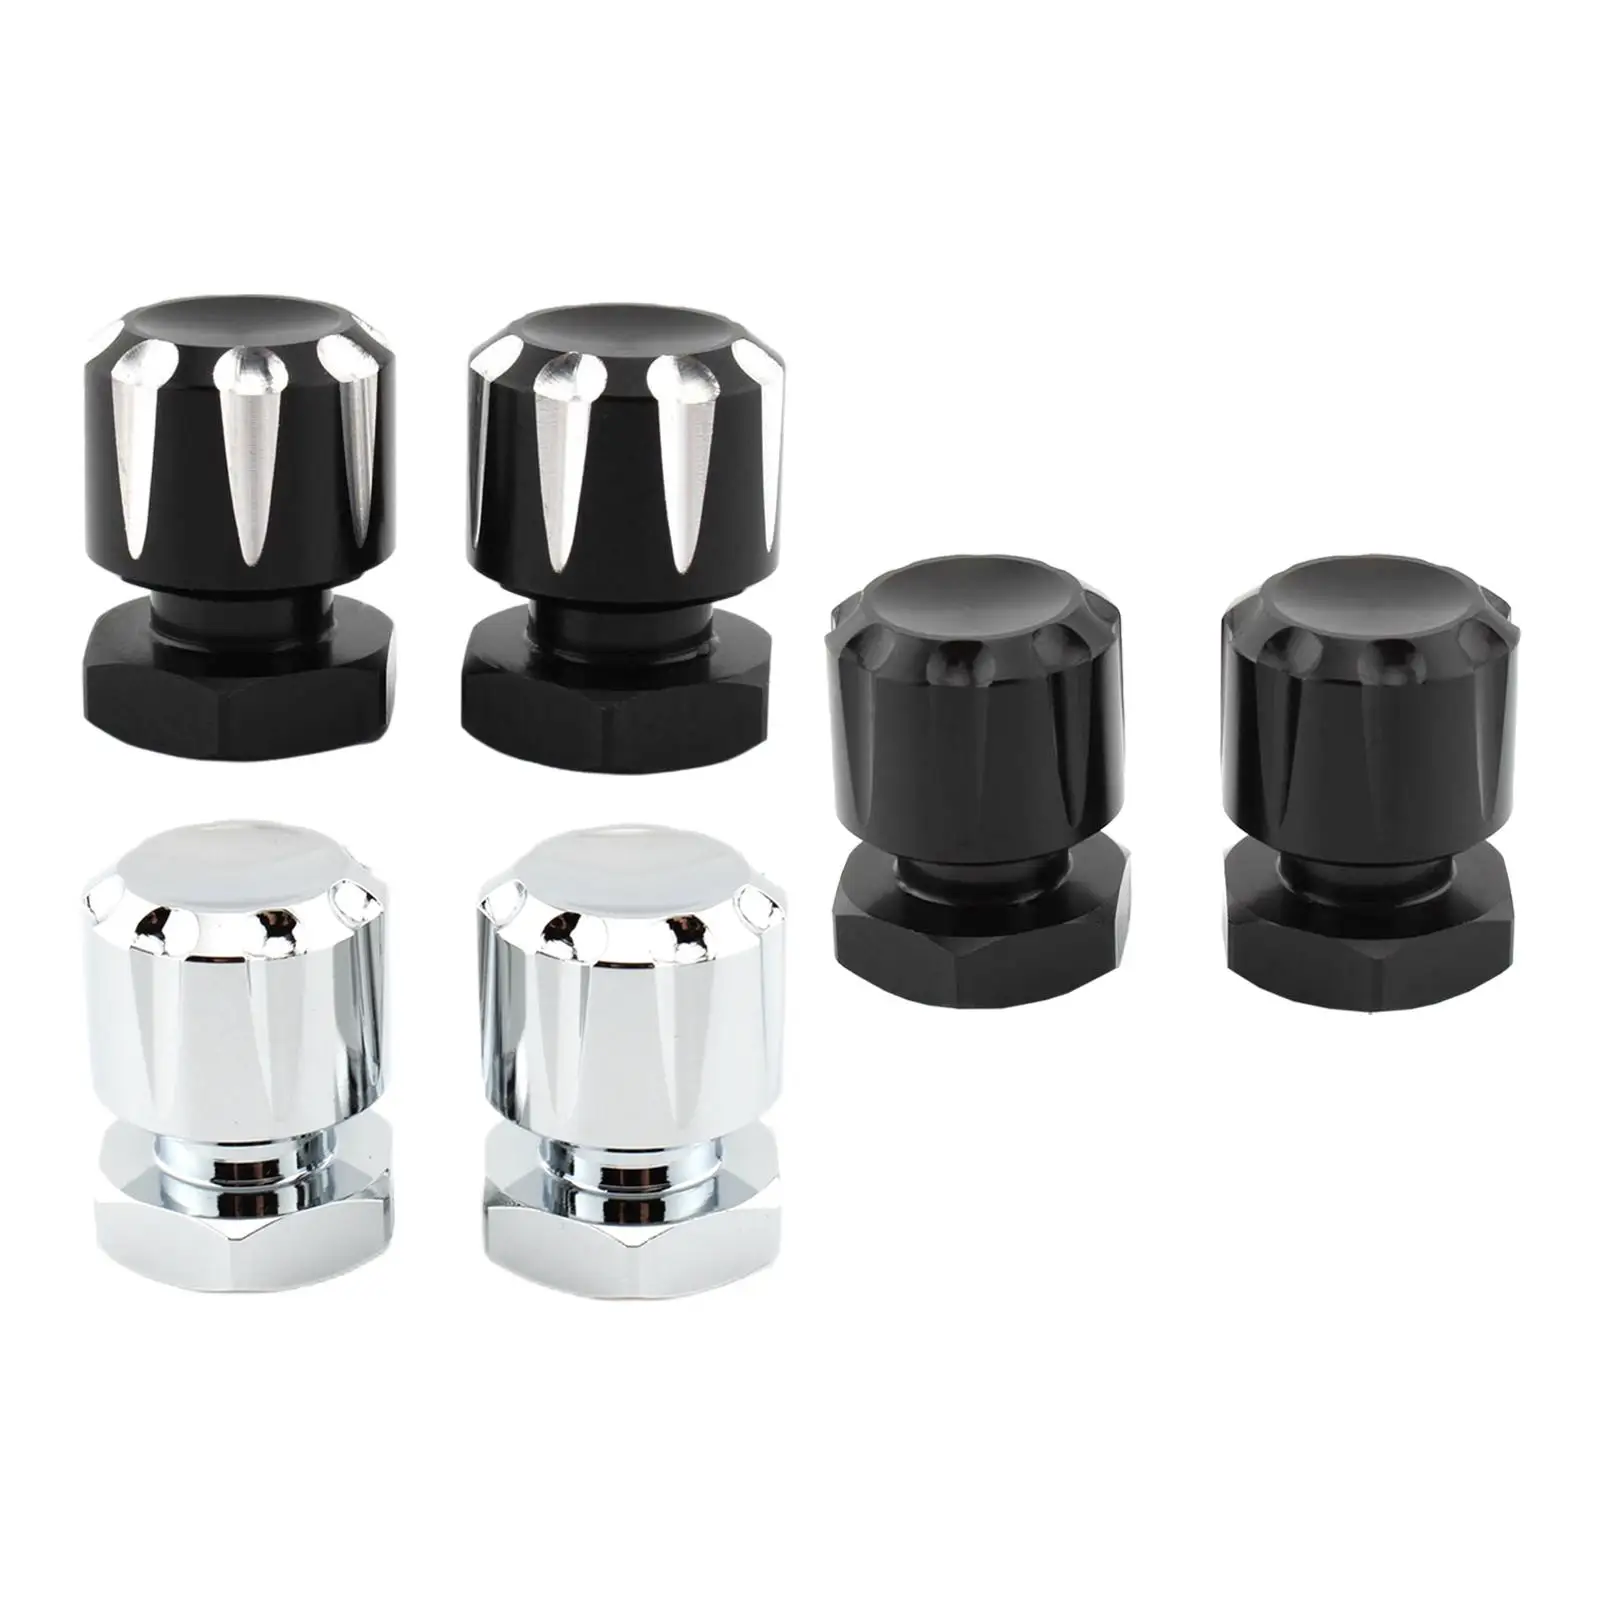 Solo Mounting Nuts Bolts 78032 Seat Mount Nuts Solo Mounting Nuts Fit for Cvo Breakout Fxsbse Professional Easy to Install